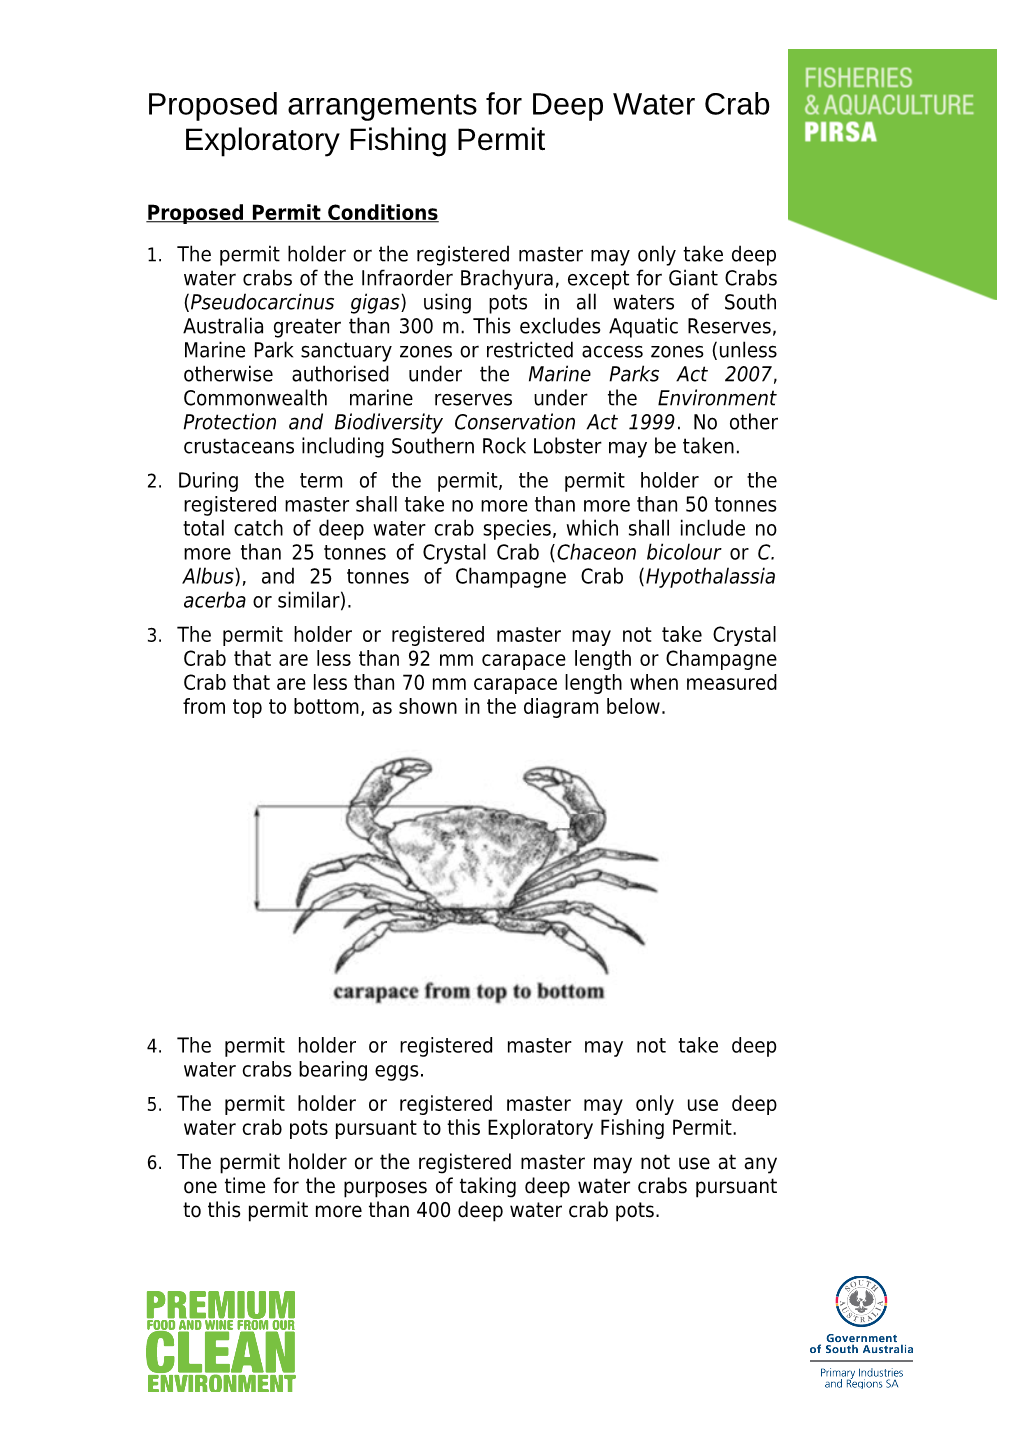 Proposed Arrangements for Deep Water Crab Exploratory Fishing Permit